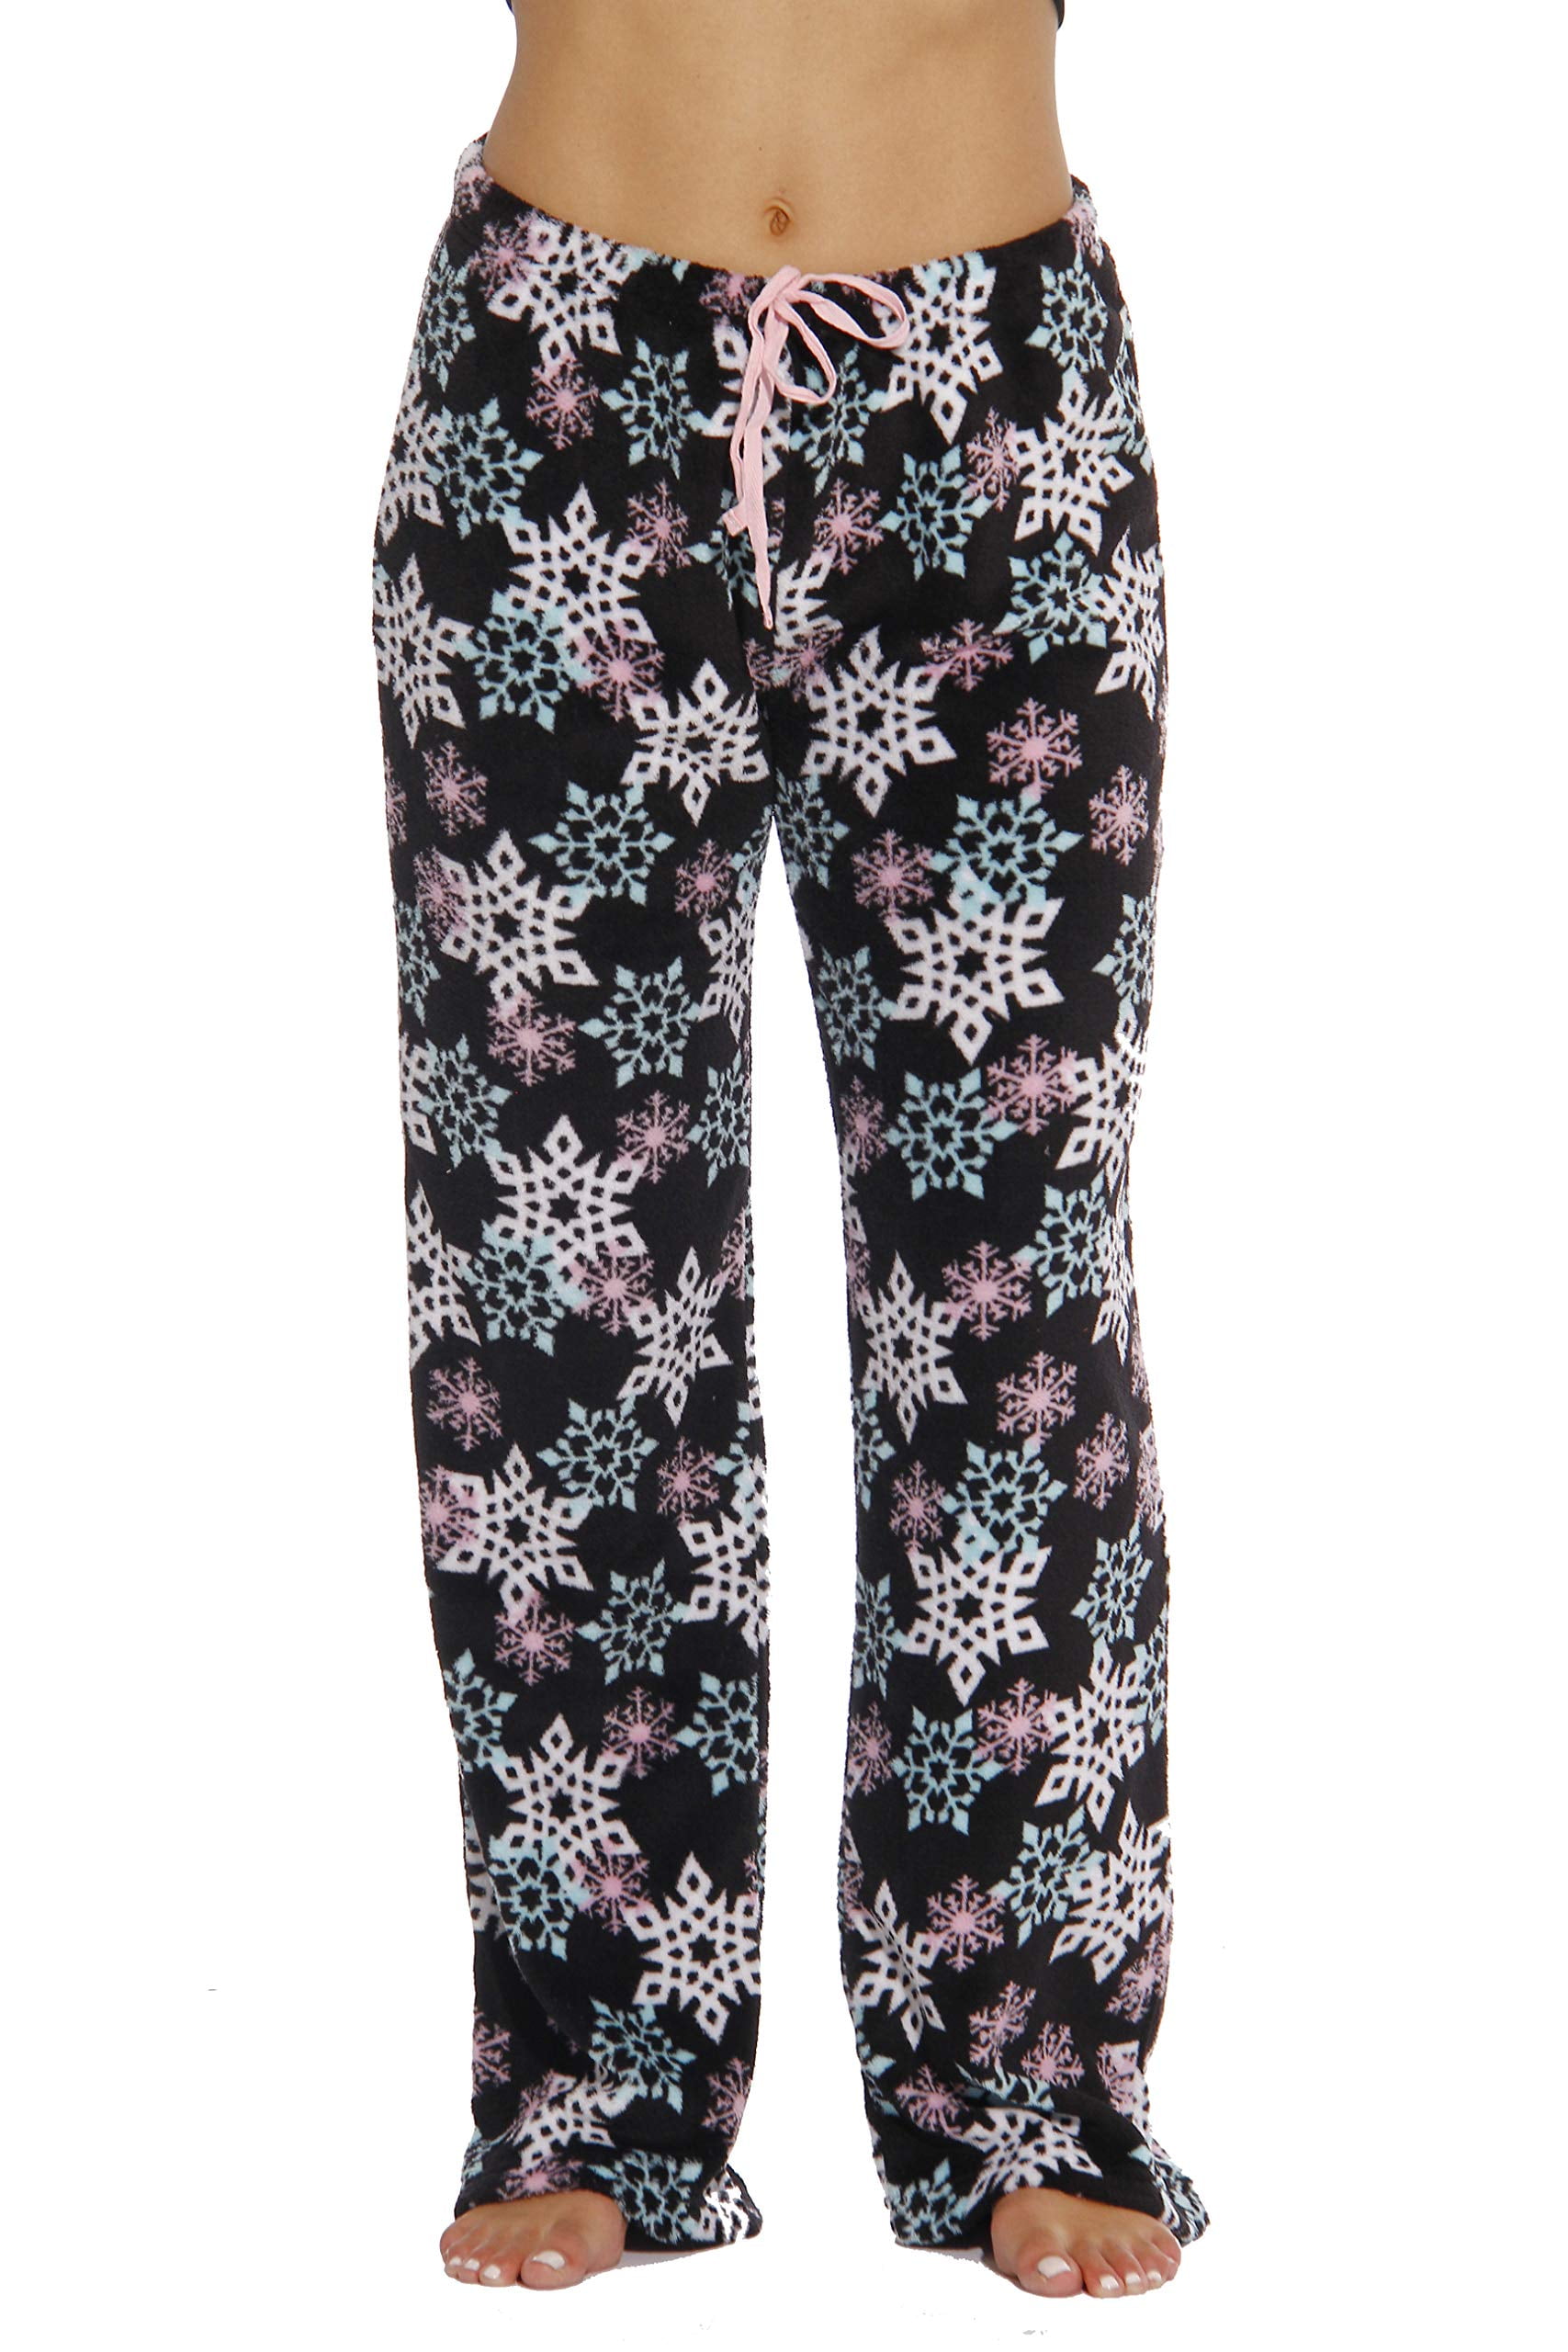 Just Love Women's Plush Pajama Pants - Soft and Cozy Lounge Pants in Petite  to Plus Sizes (Black - Snowflake, Small)